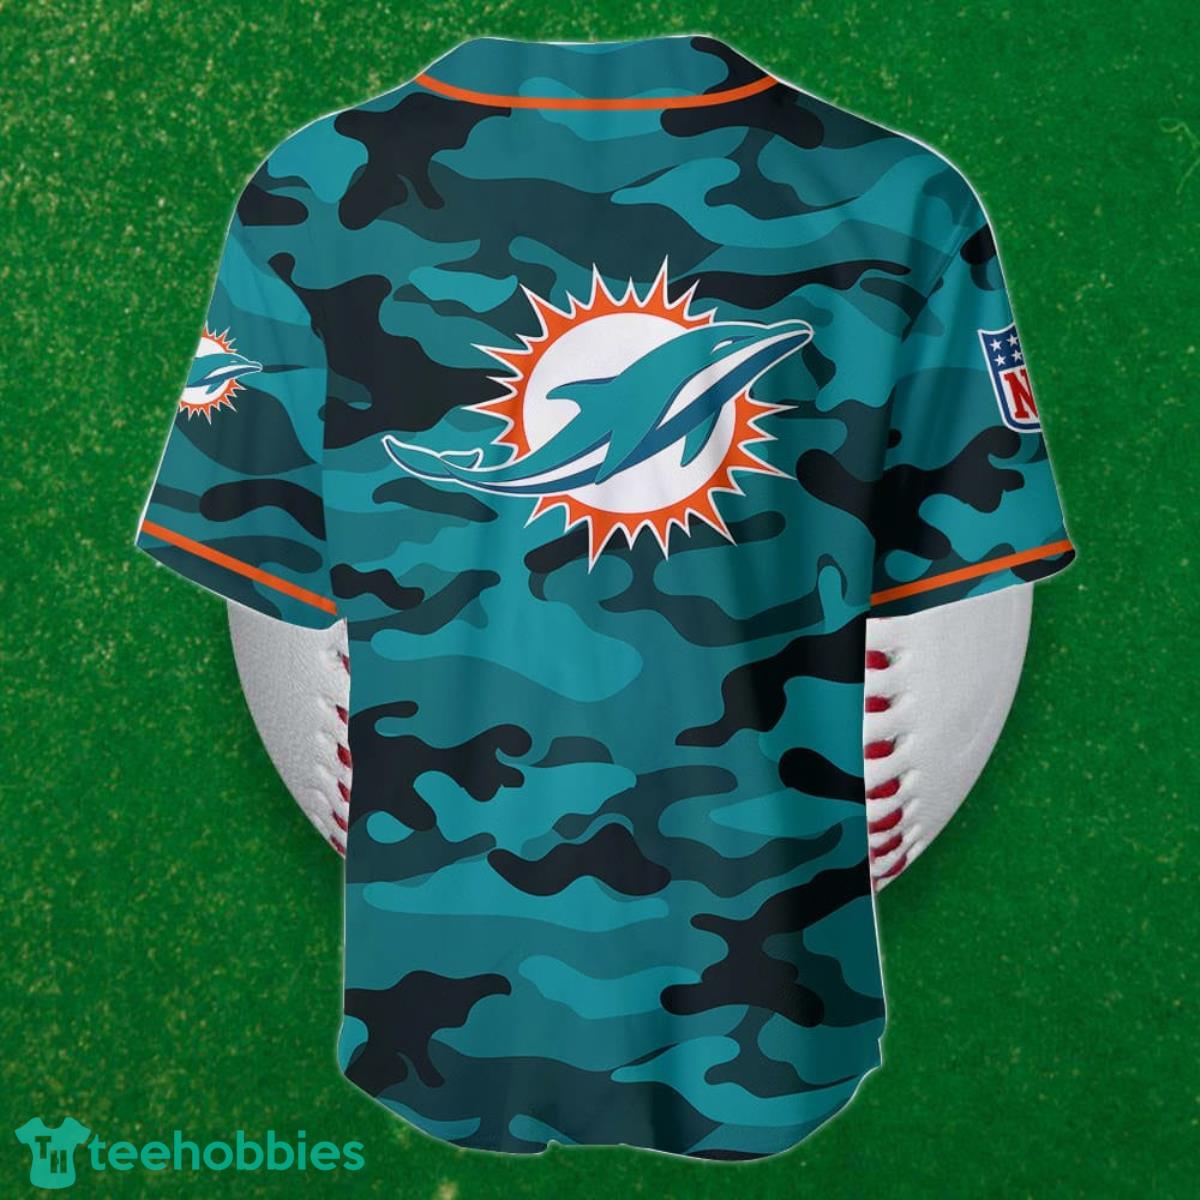 Personalized Miami Dolphins Baseball Jersey Shirt For Fans